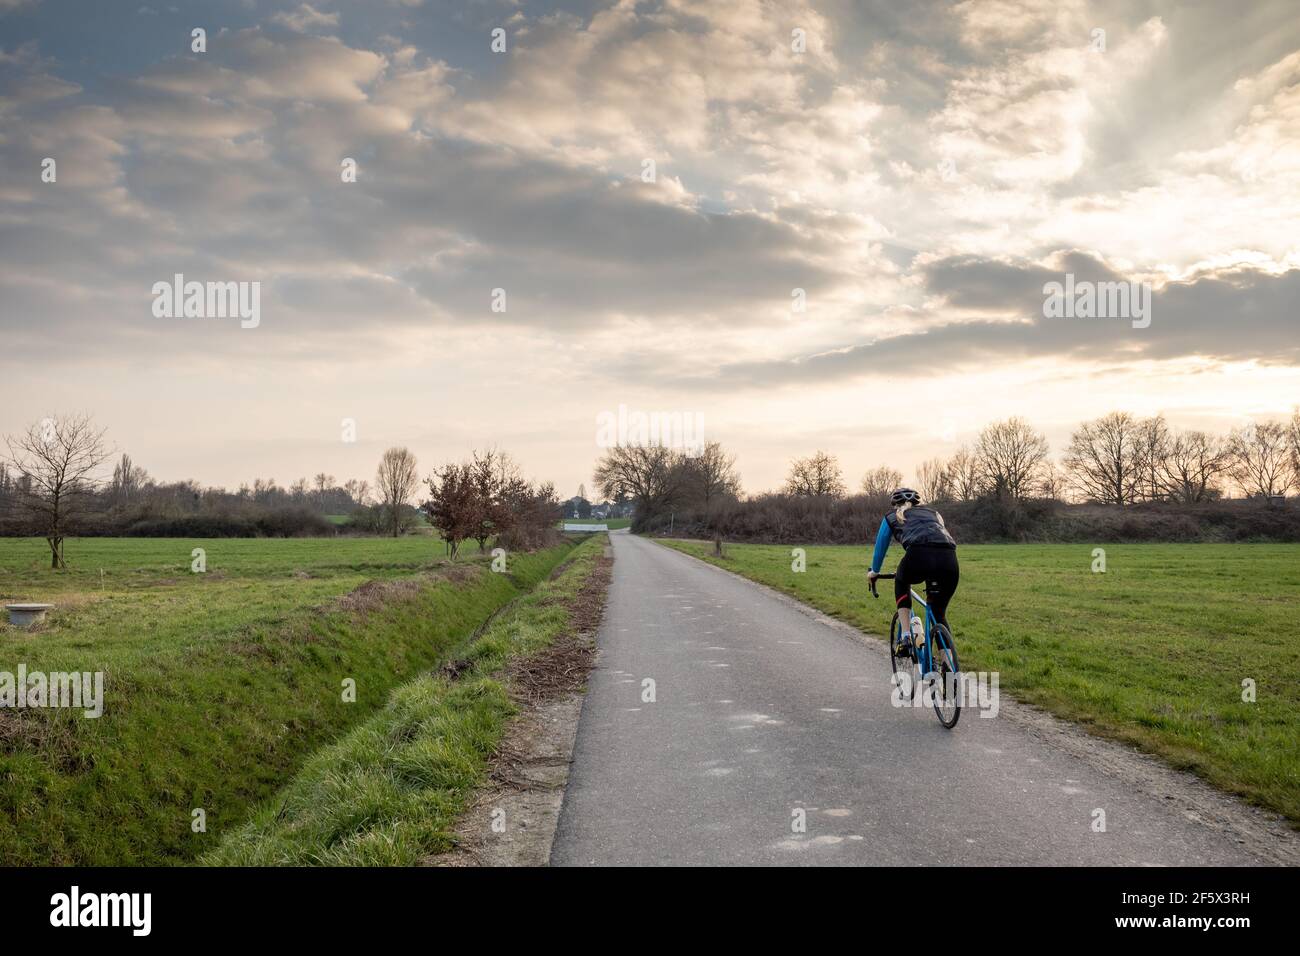 Outdoor sunny view of cyclist ride a bicycle on small road in suburb area surrounded with agricultural field in spring season against dramatic sky. Stock Photo